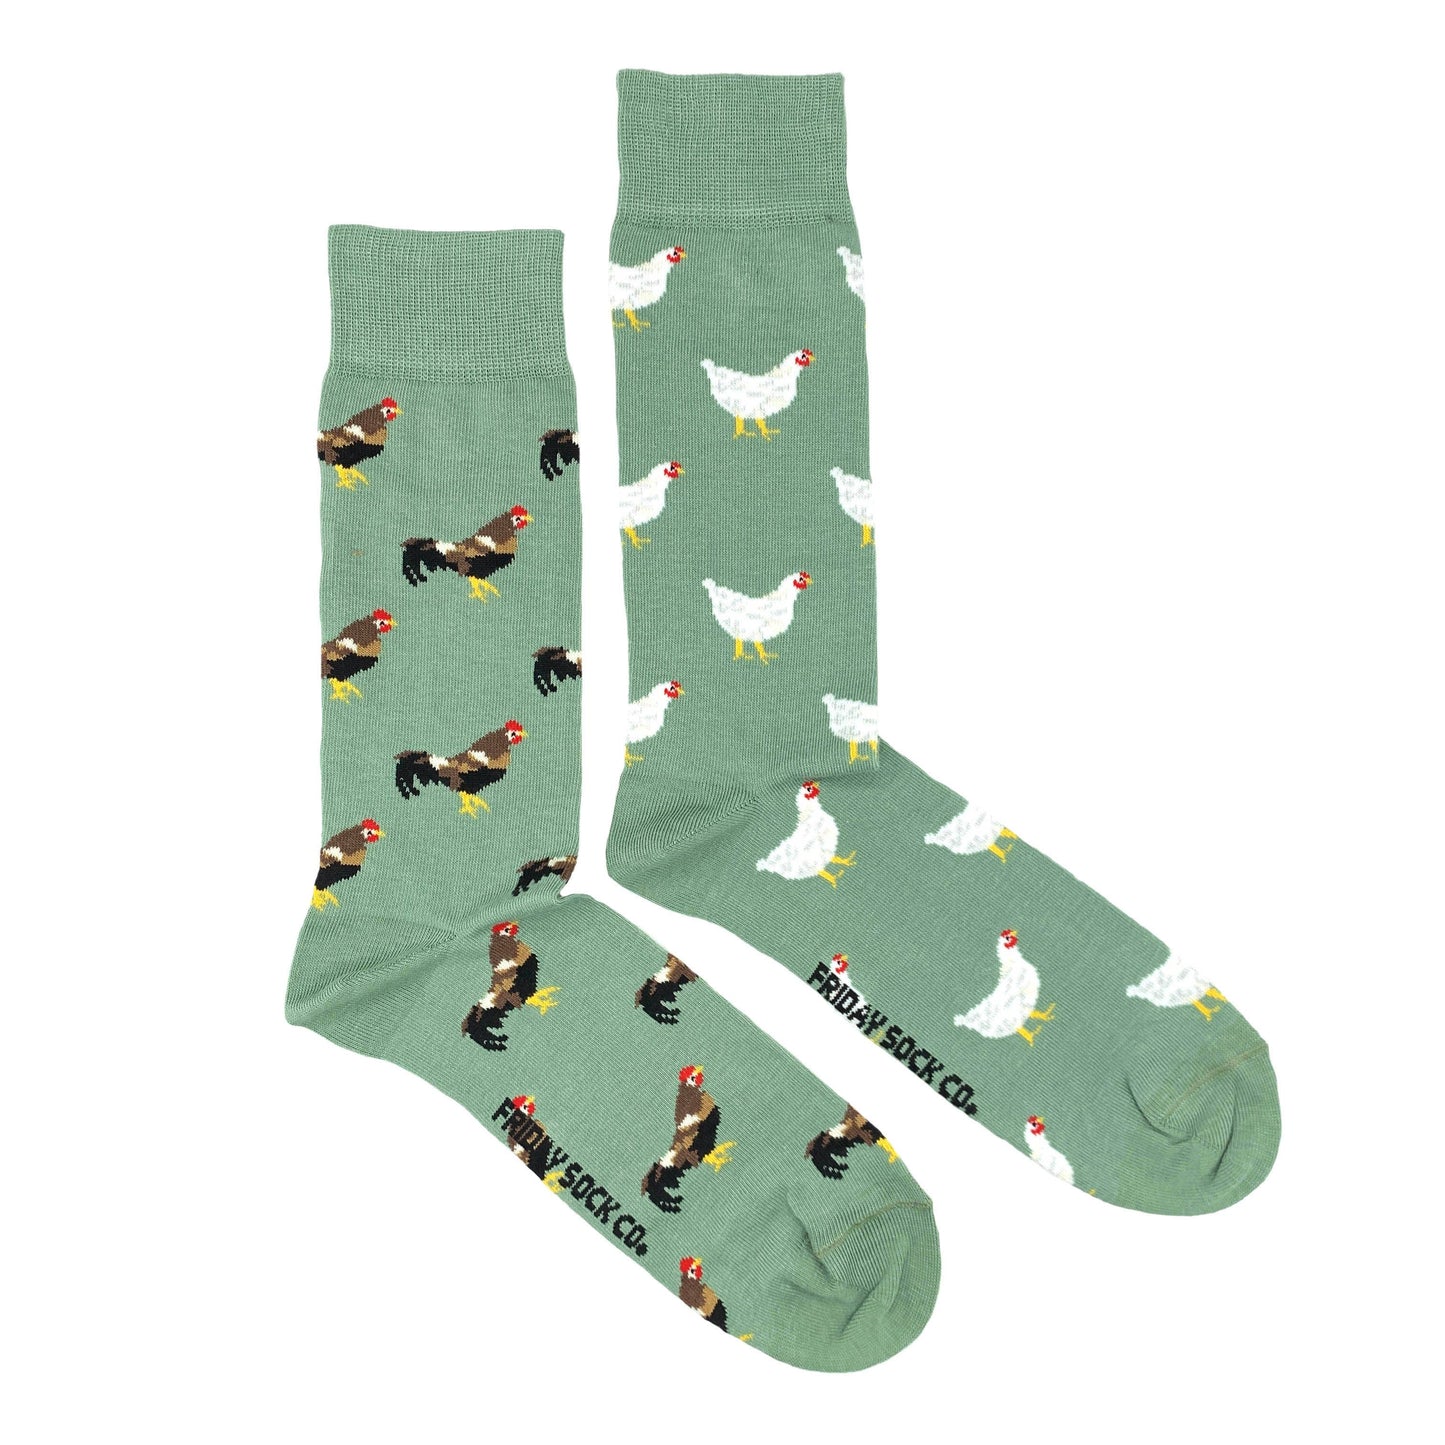 Chicken & Rooster Men's Mismatched Socks | Eco Friendly